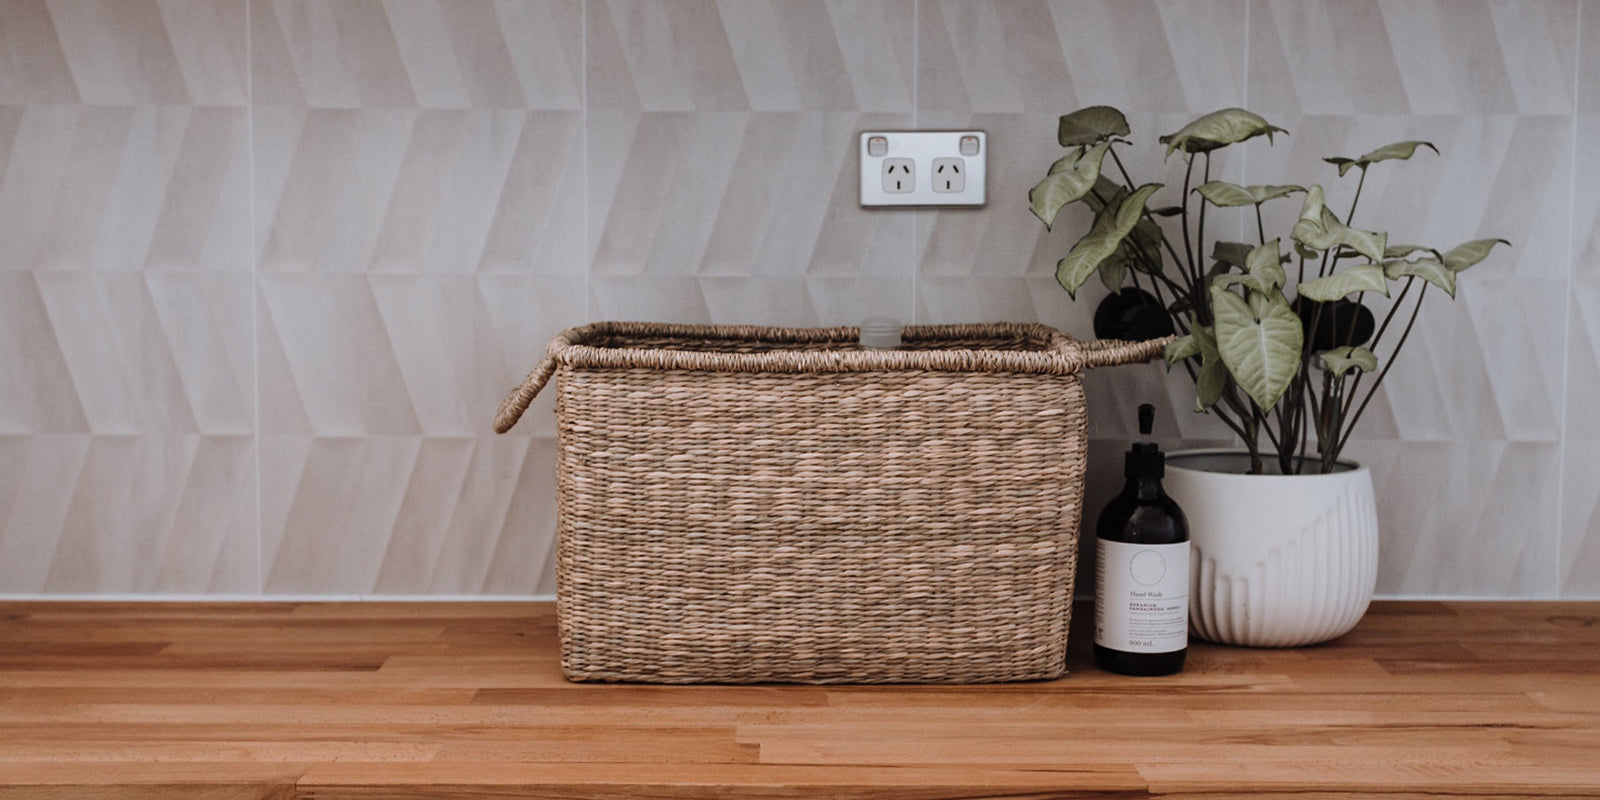 Utility worktop with refill bottle and basket